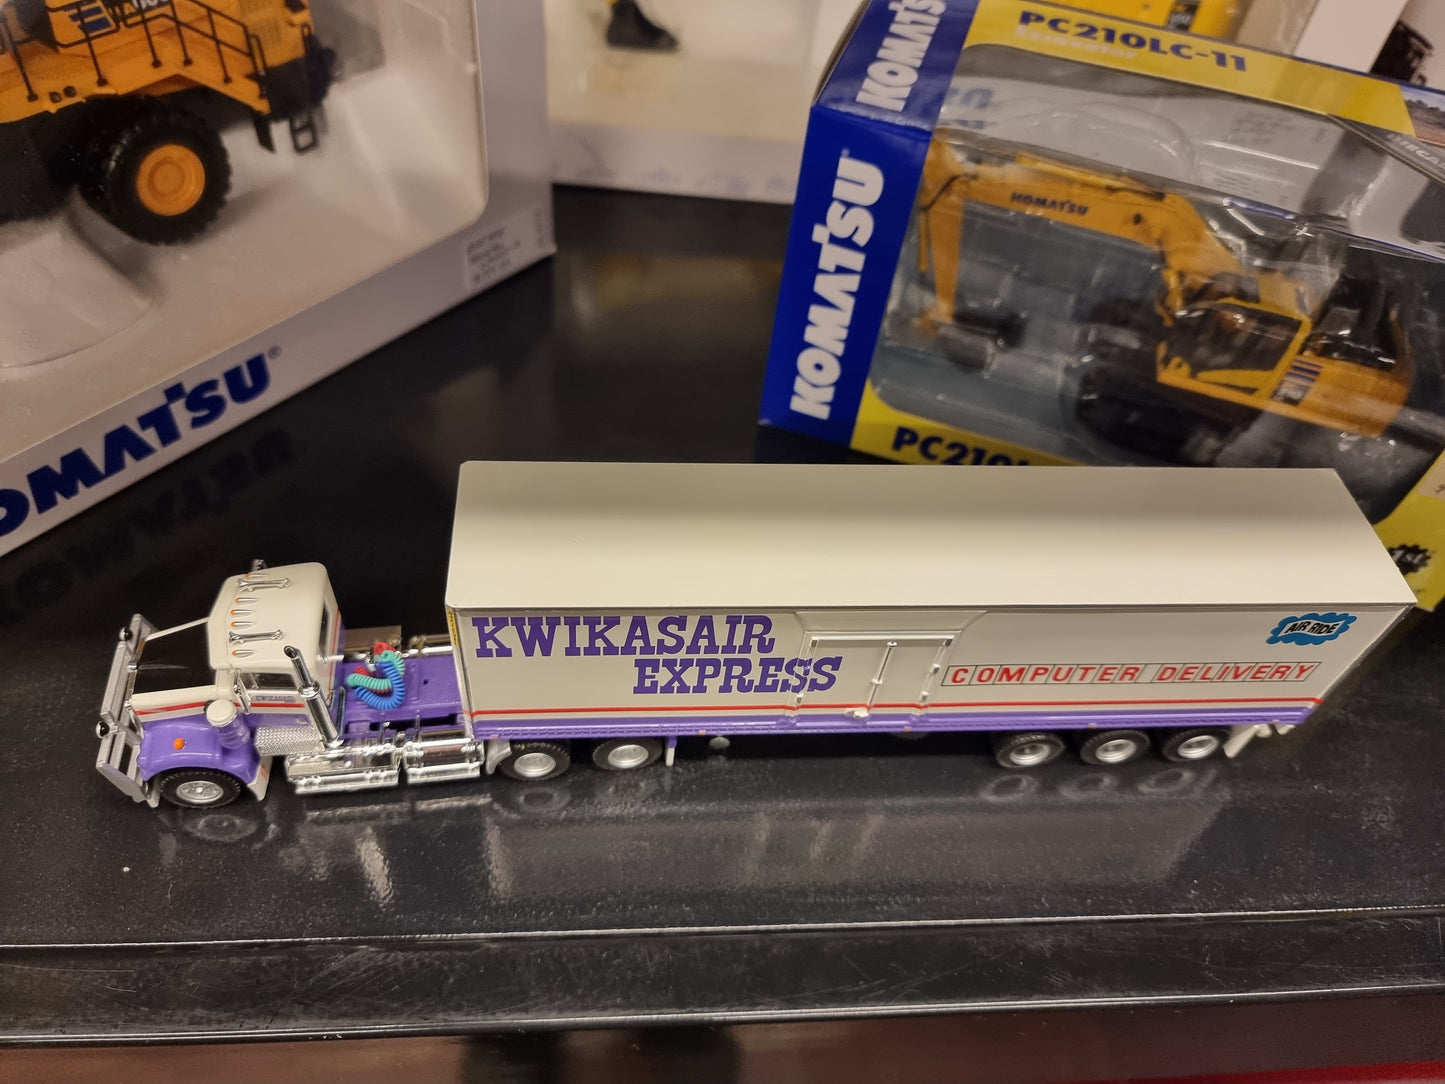 1/64 Kwikasair - prime mover and refrigerated trailer